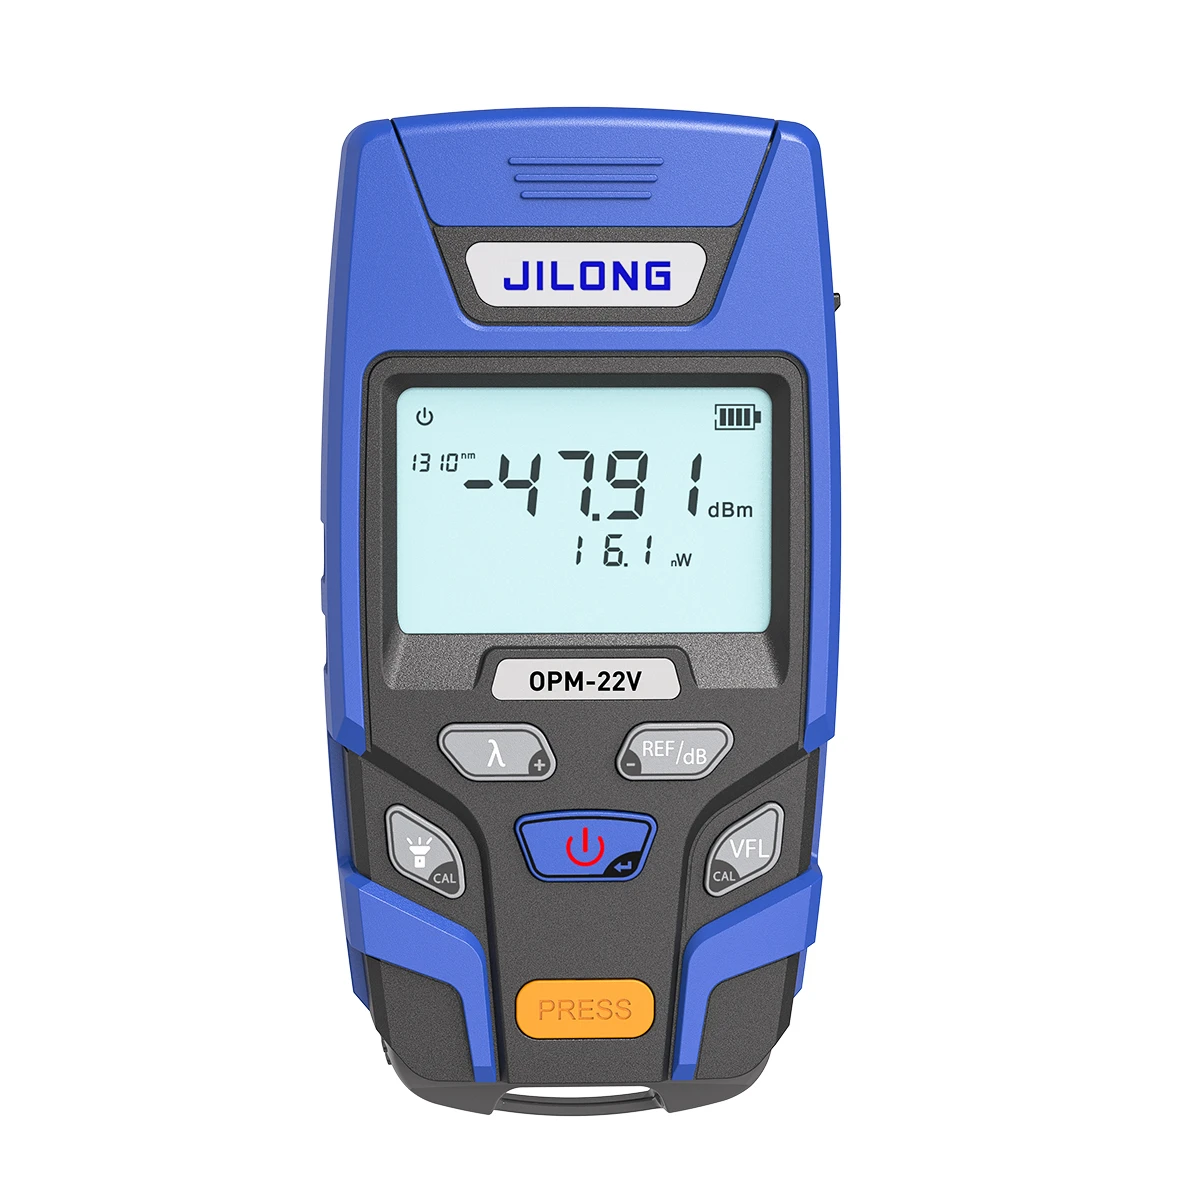 JILONG OPM-22 OPM build-in LED With 7 Wavelengths Power Meter, Fiber Optic Power Meter -70~+6dbm with 10mw VFL fiber fast connector